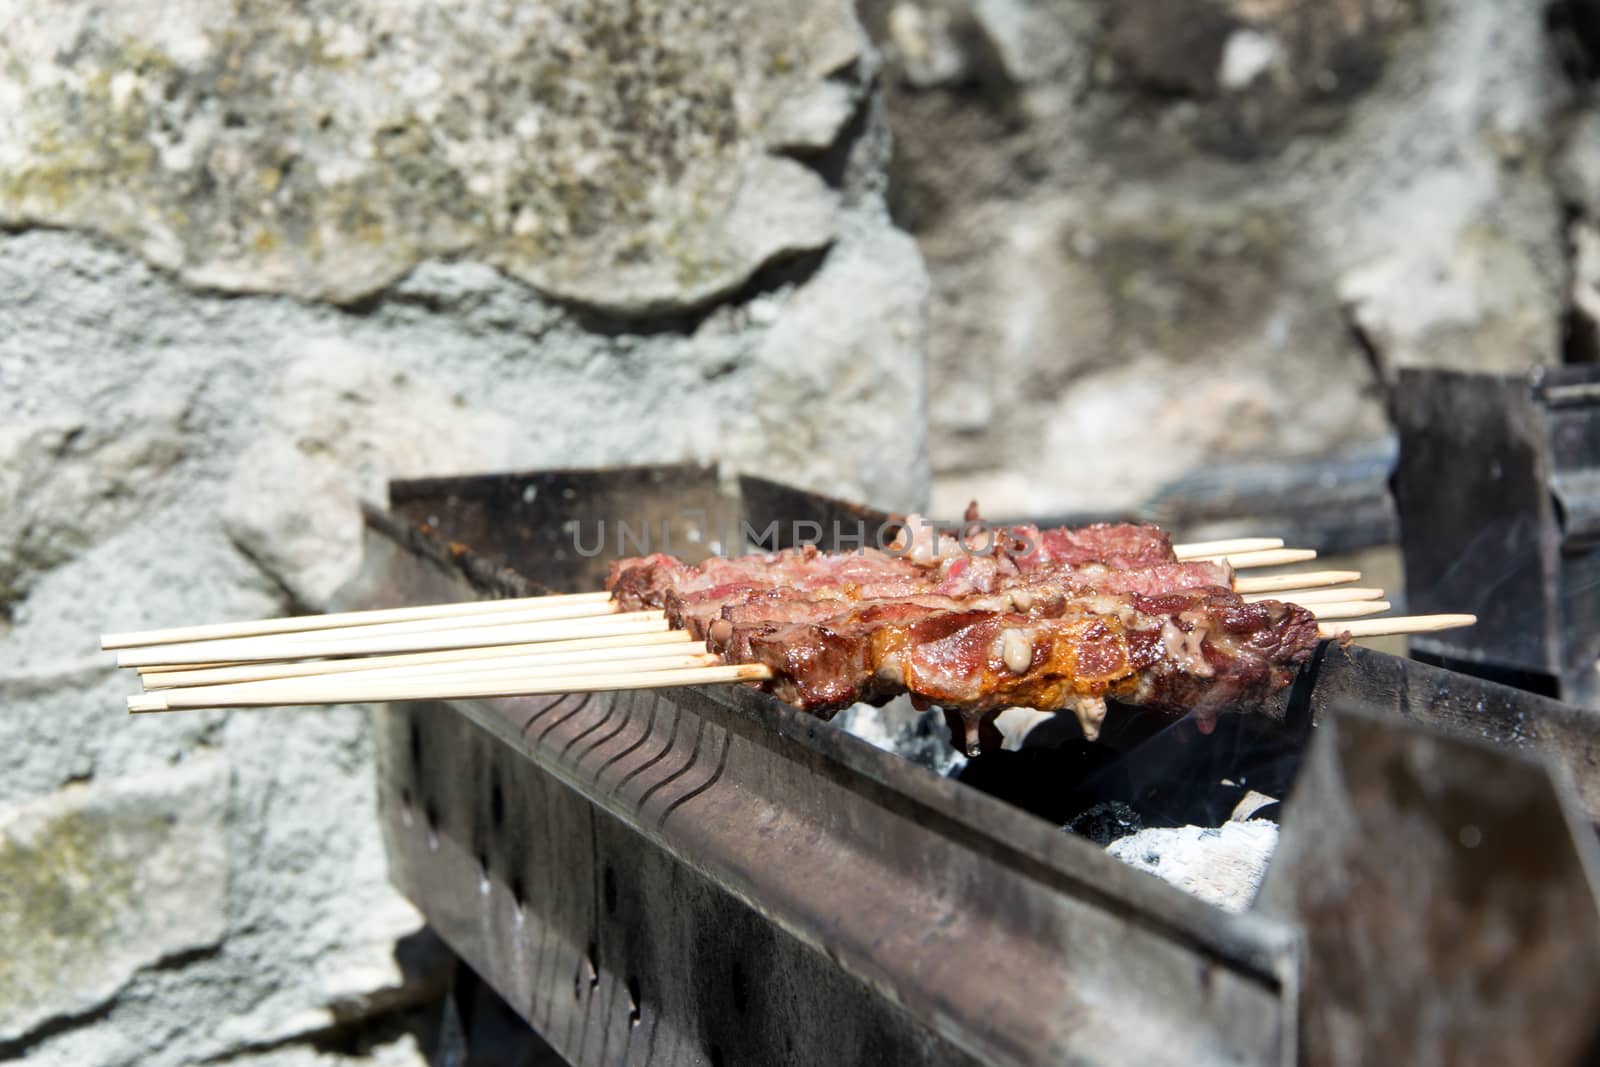 Arrosticini on the grill, Abruzzi skewers of sheep cooked on the grate and on a special brazier.